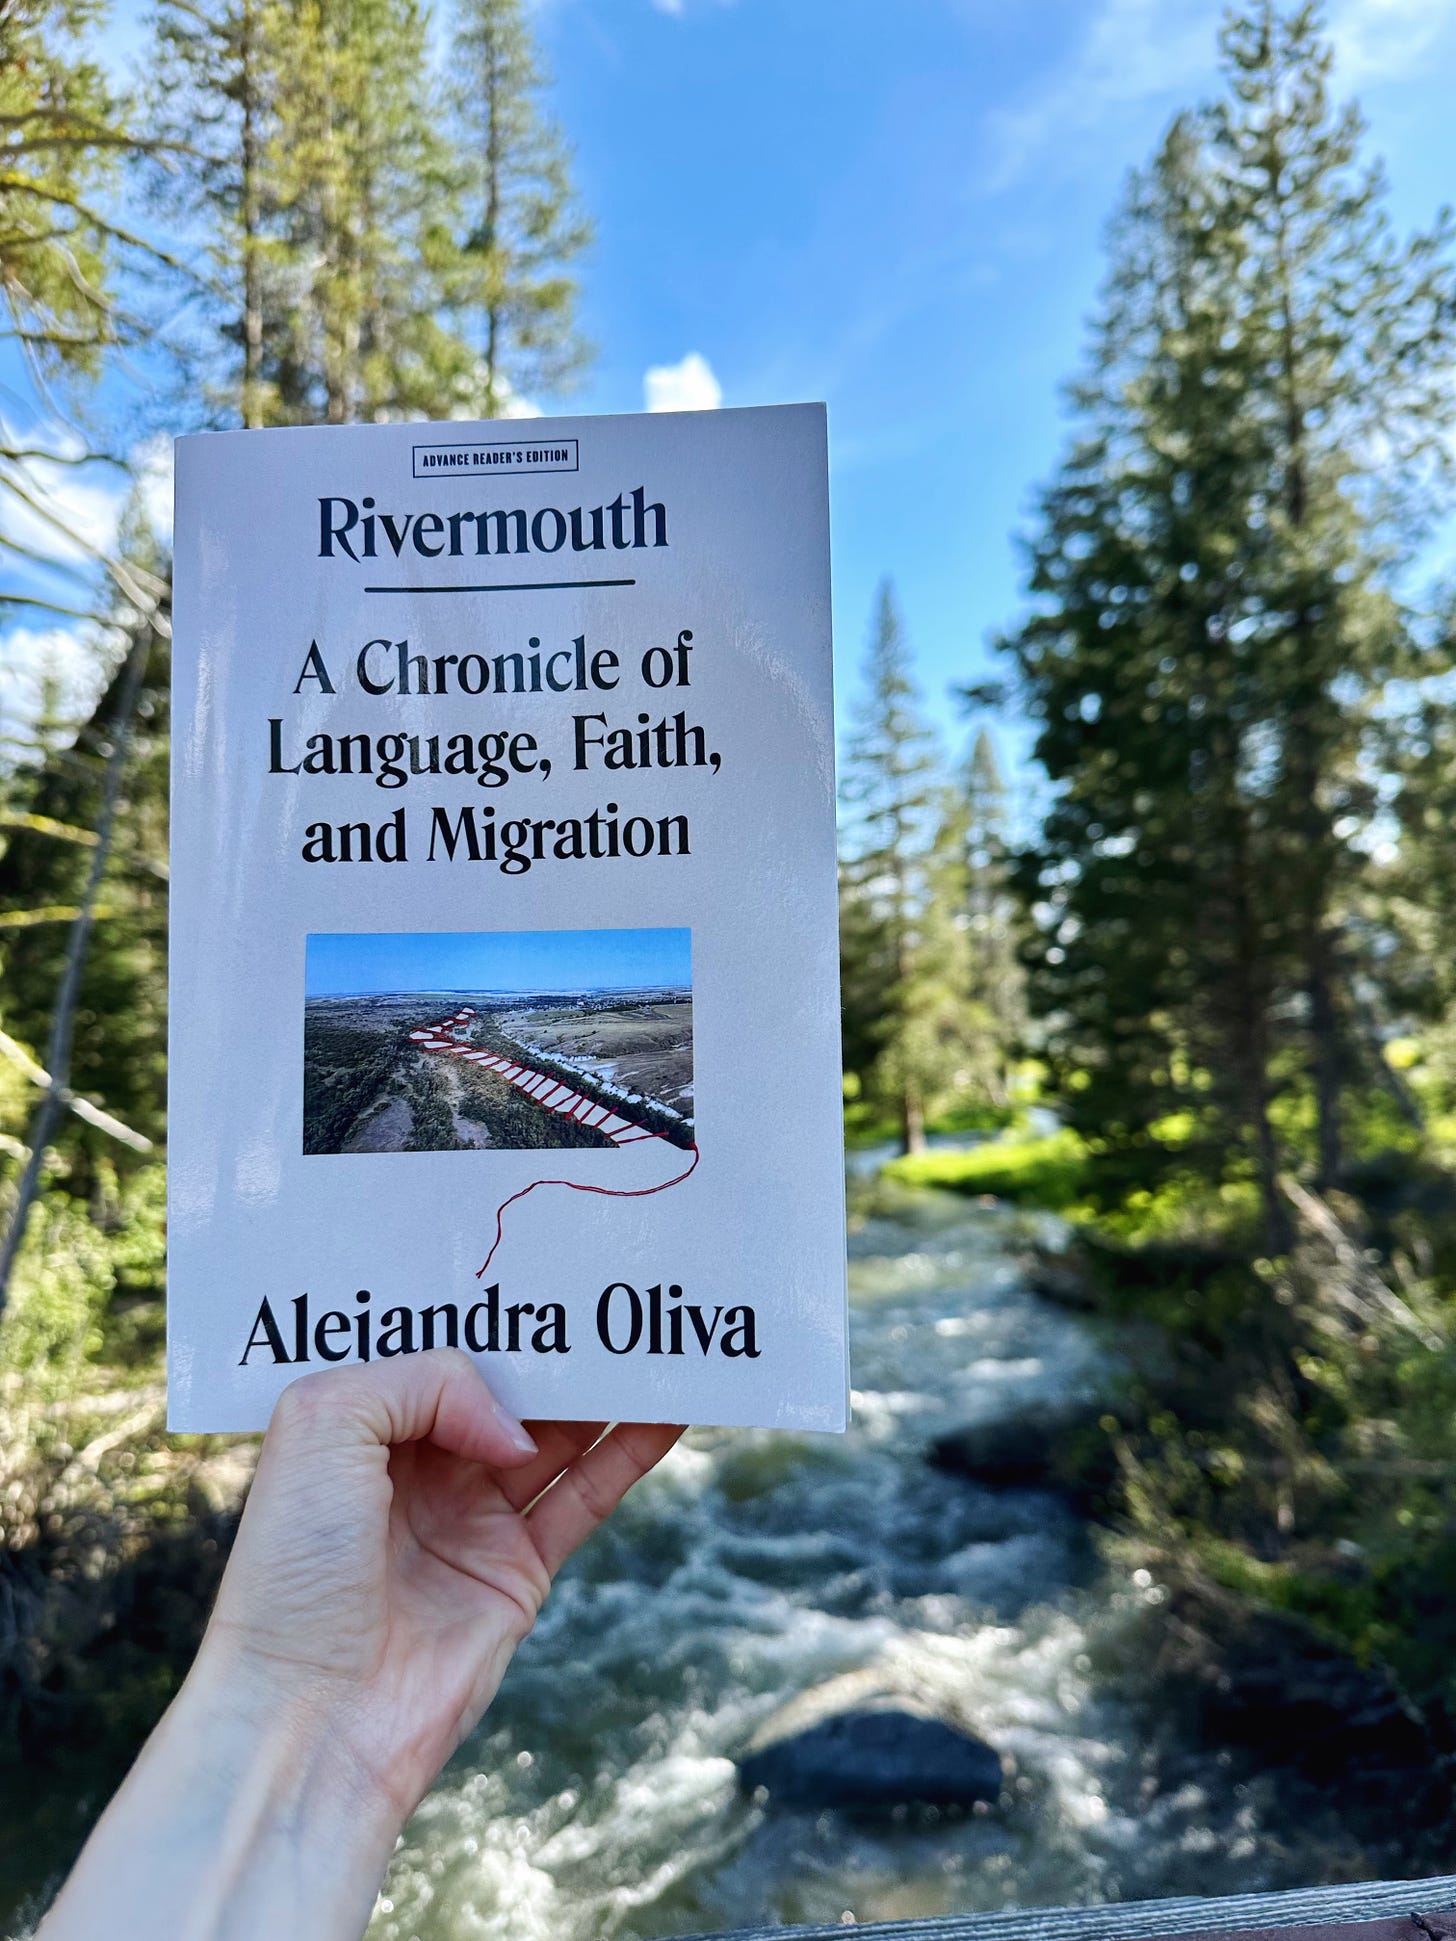 A white hand holds up a copy of Rivermouth in front of a river, green trees, and a blue sky